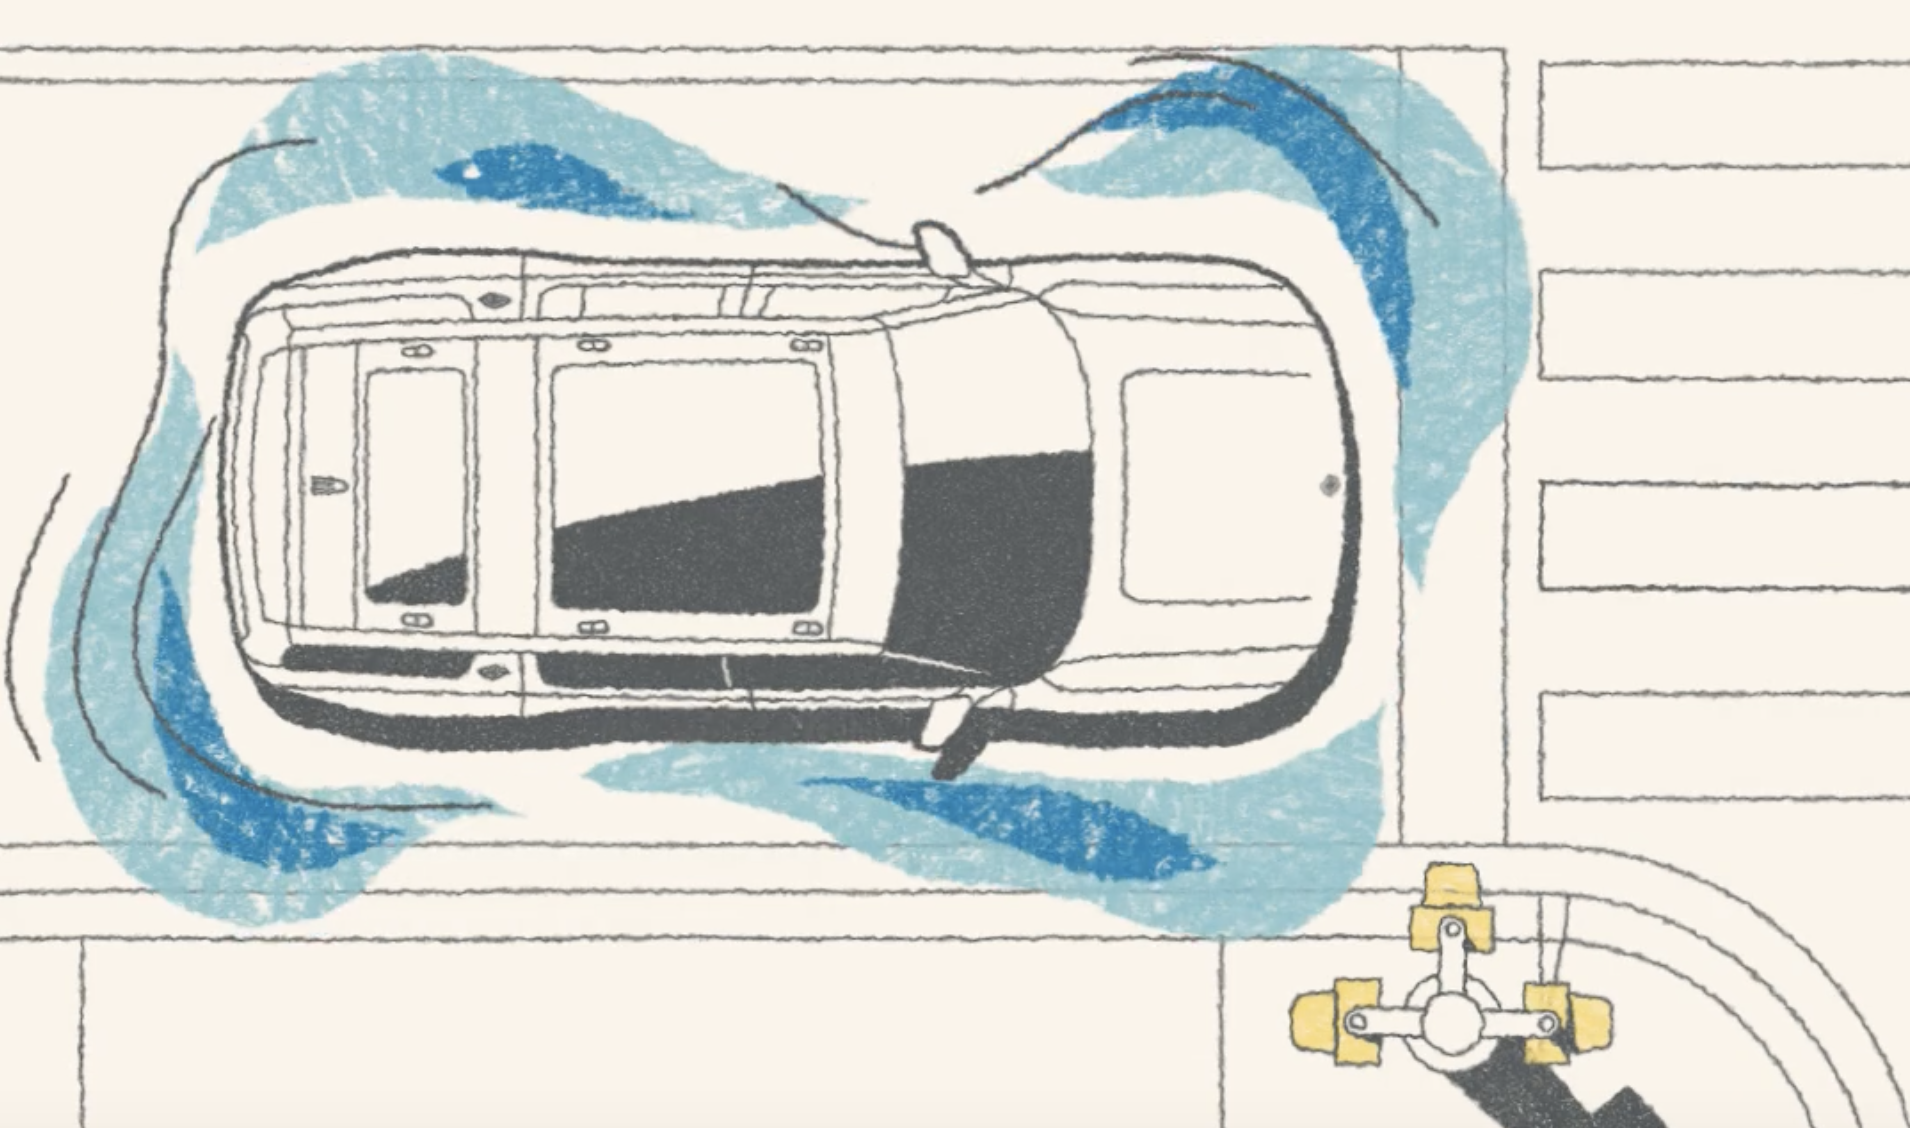 Illustration of a vehicle shown from above with waves of sounds around it